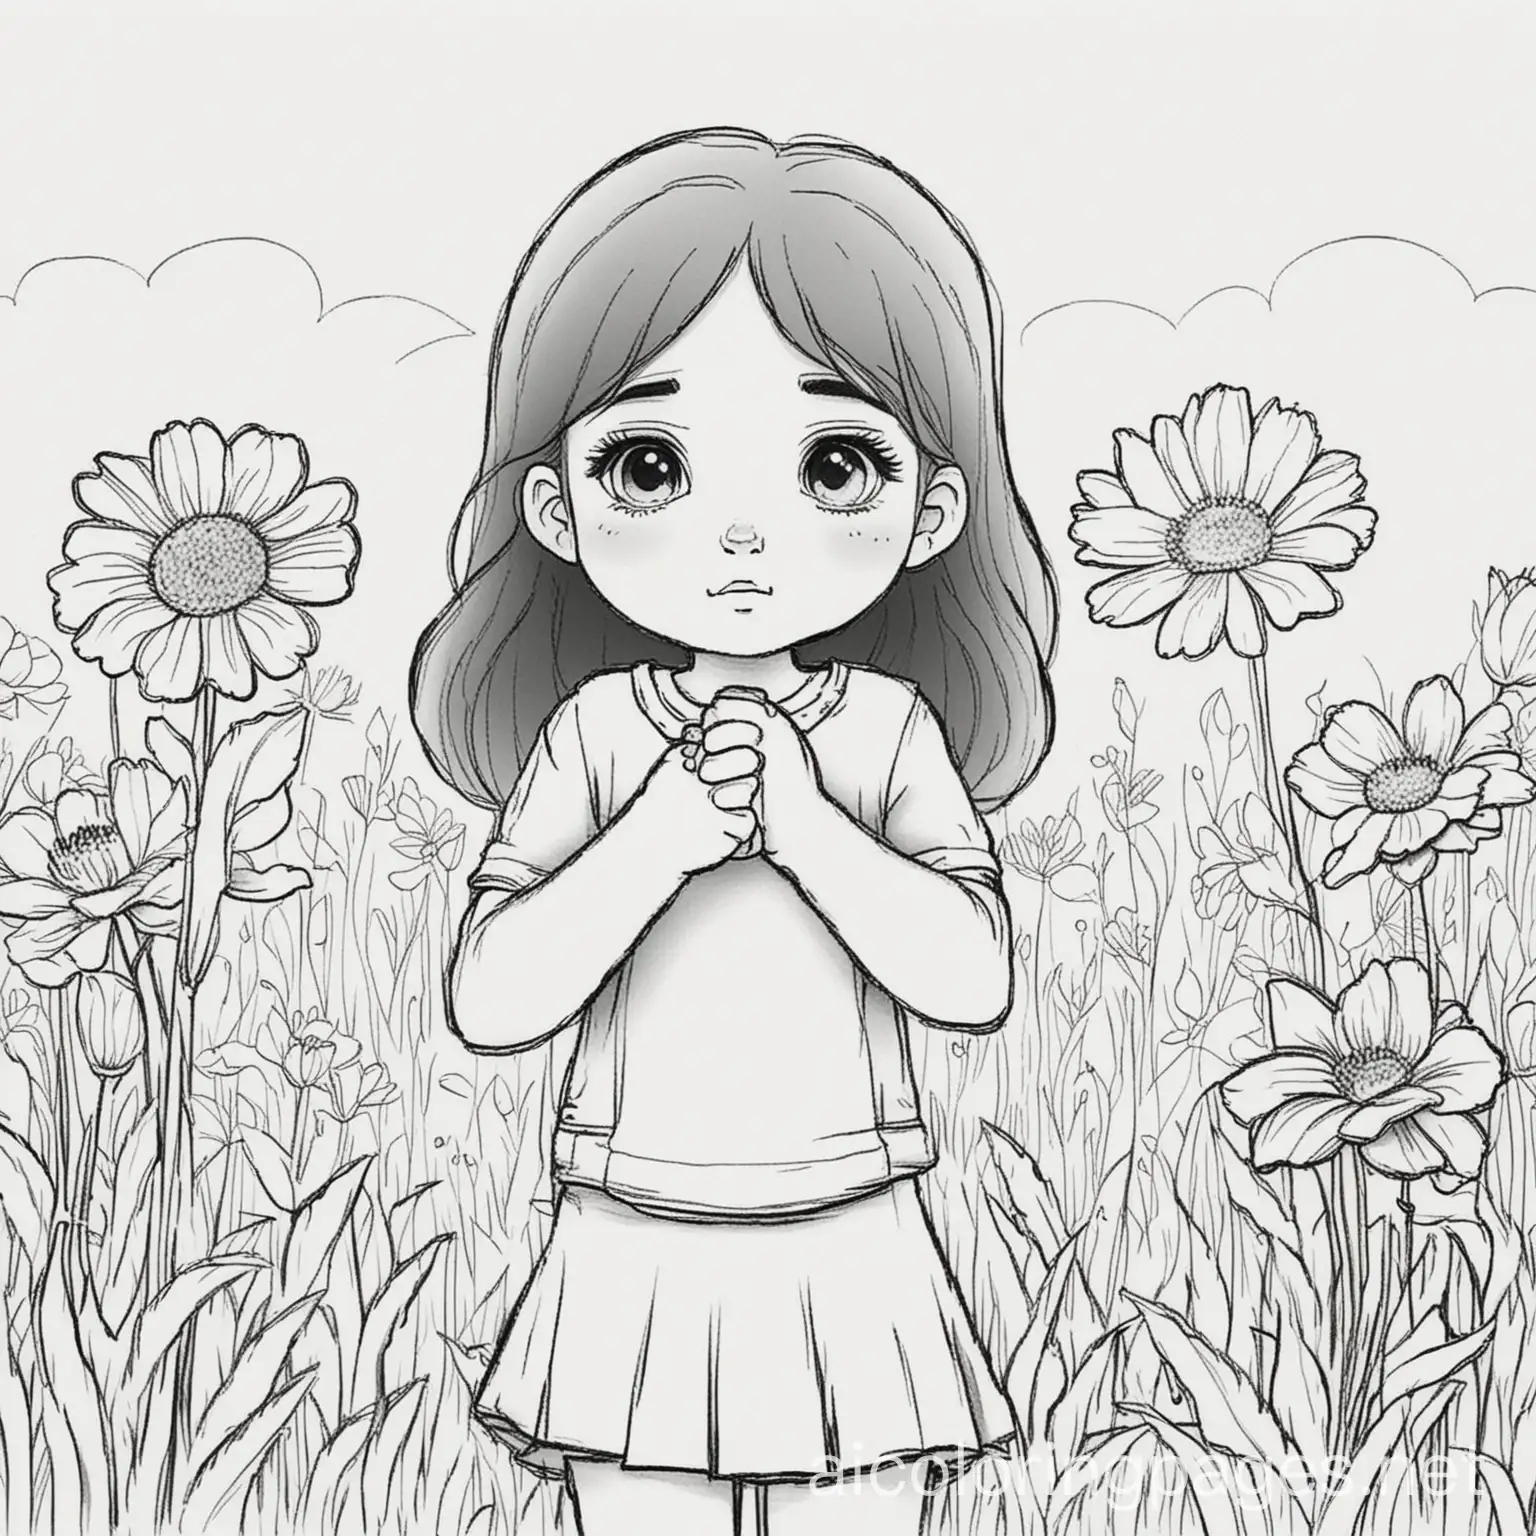 Young-Girl-Crying-in-Flowered-Meadow-Coloring-Page